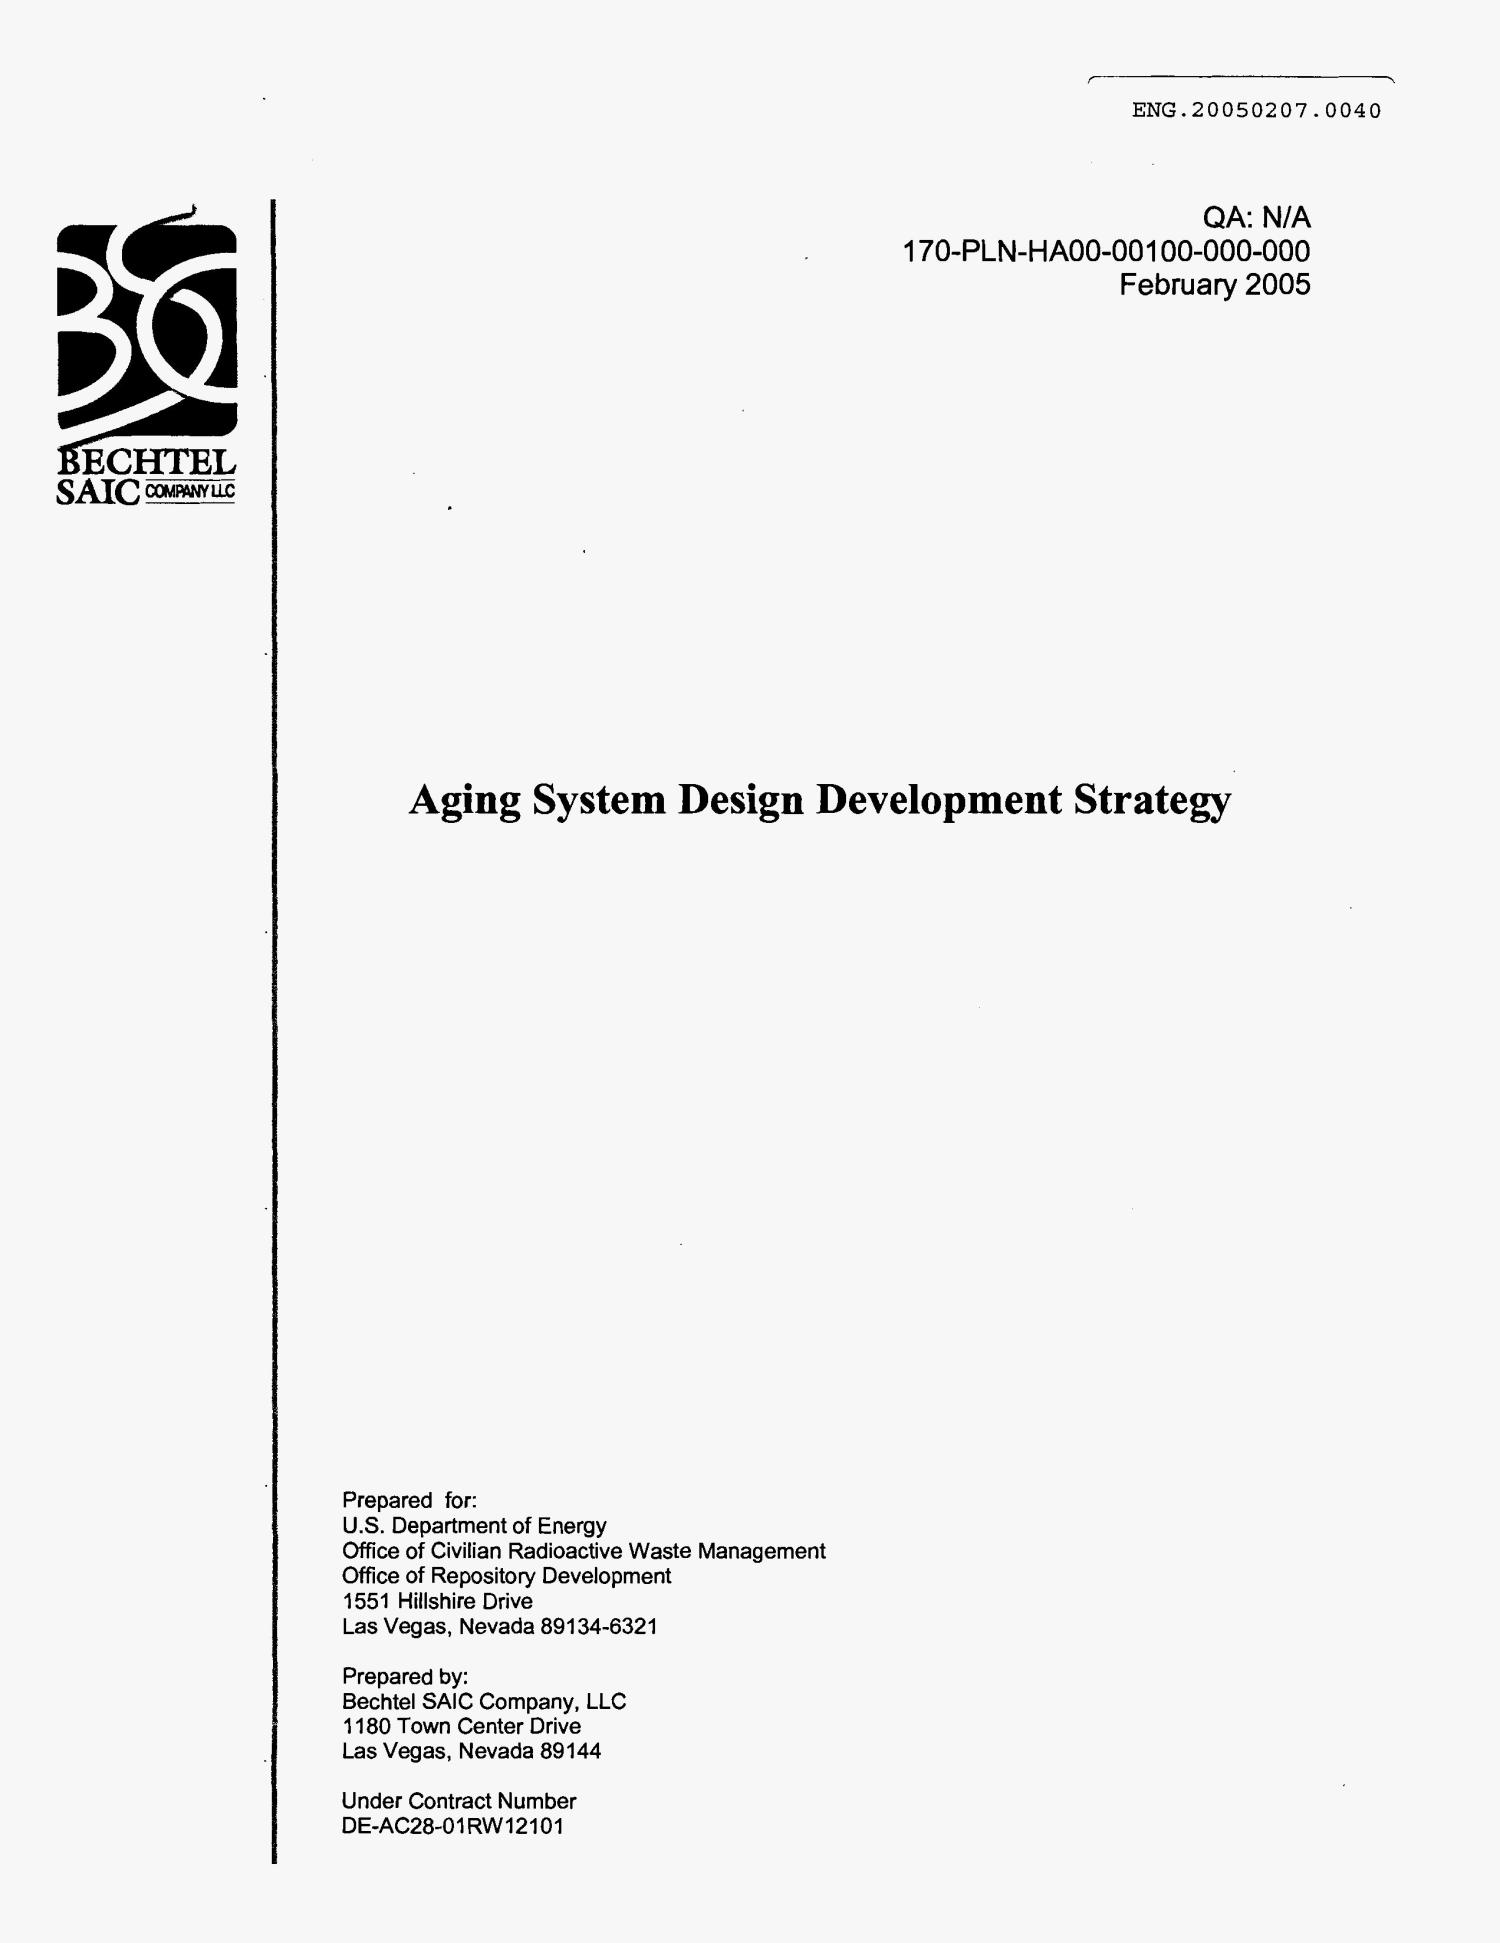 AGING SYSTEM DESIGN DEVELOPMENT STRATEGY
                                                
                                                    [Sequence #]: 1 of 24
                                                